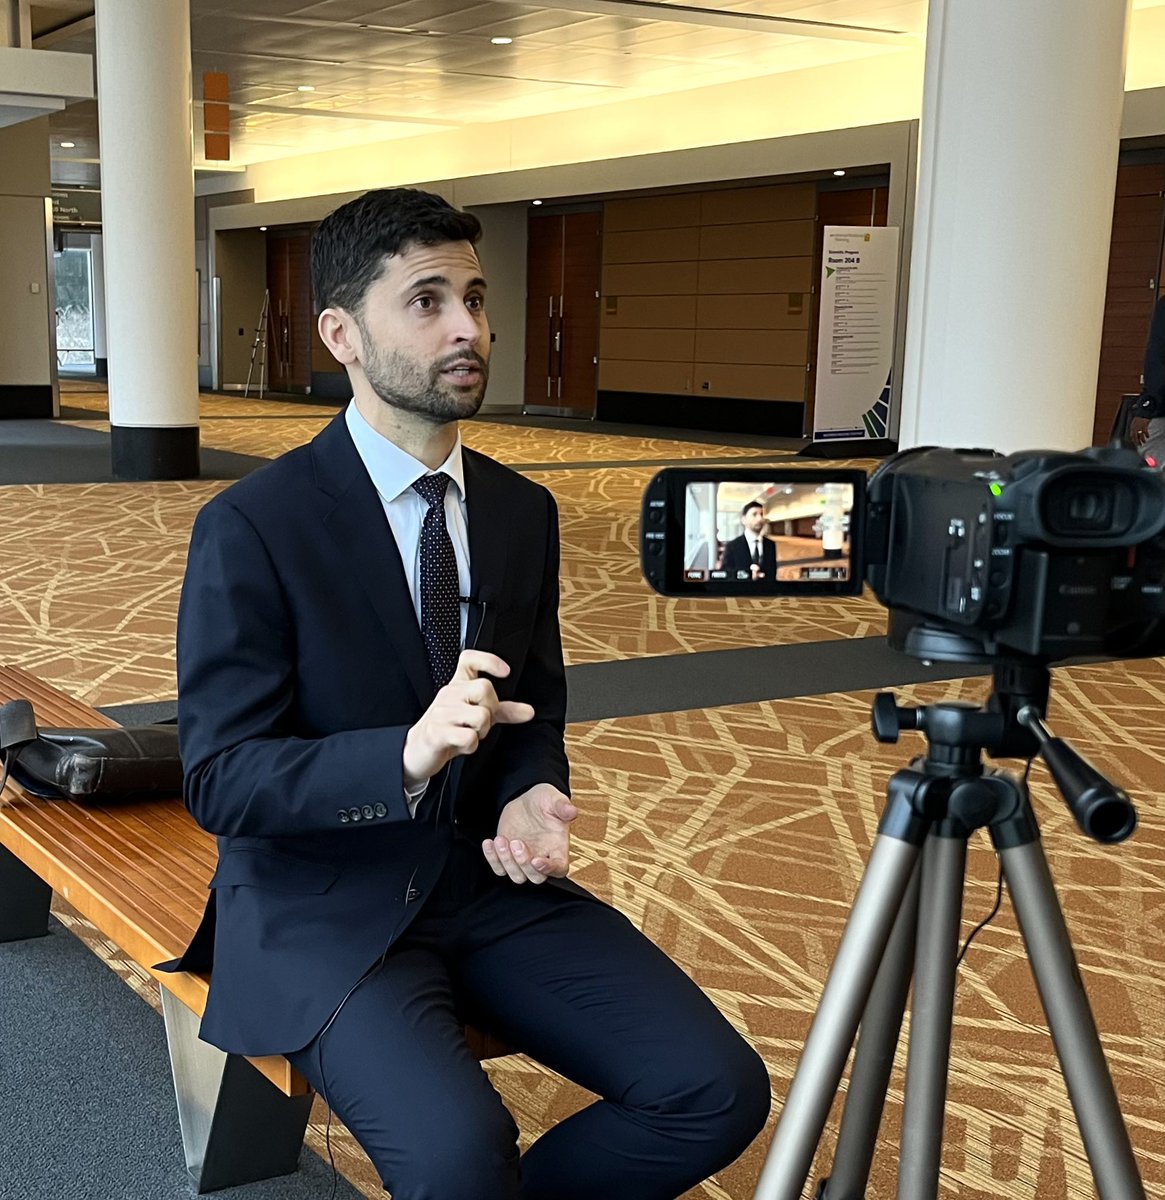 More behind the scenes at @ACPIMPhysicians #IM2024, this time with @ddbergMD as he discusses key takeaways from his session on acute coronary syndrome🫀 Check out the interview here: hcplive.com/view/david-ber…